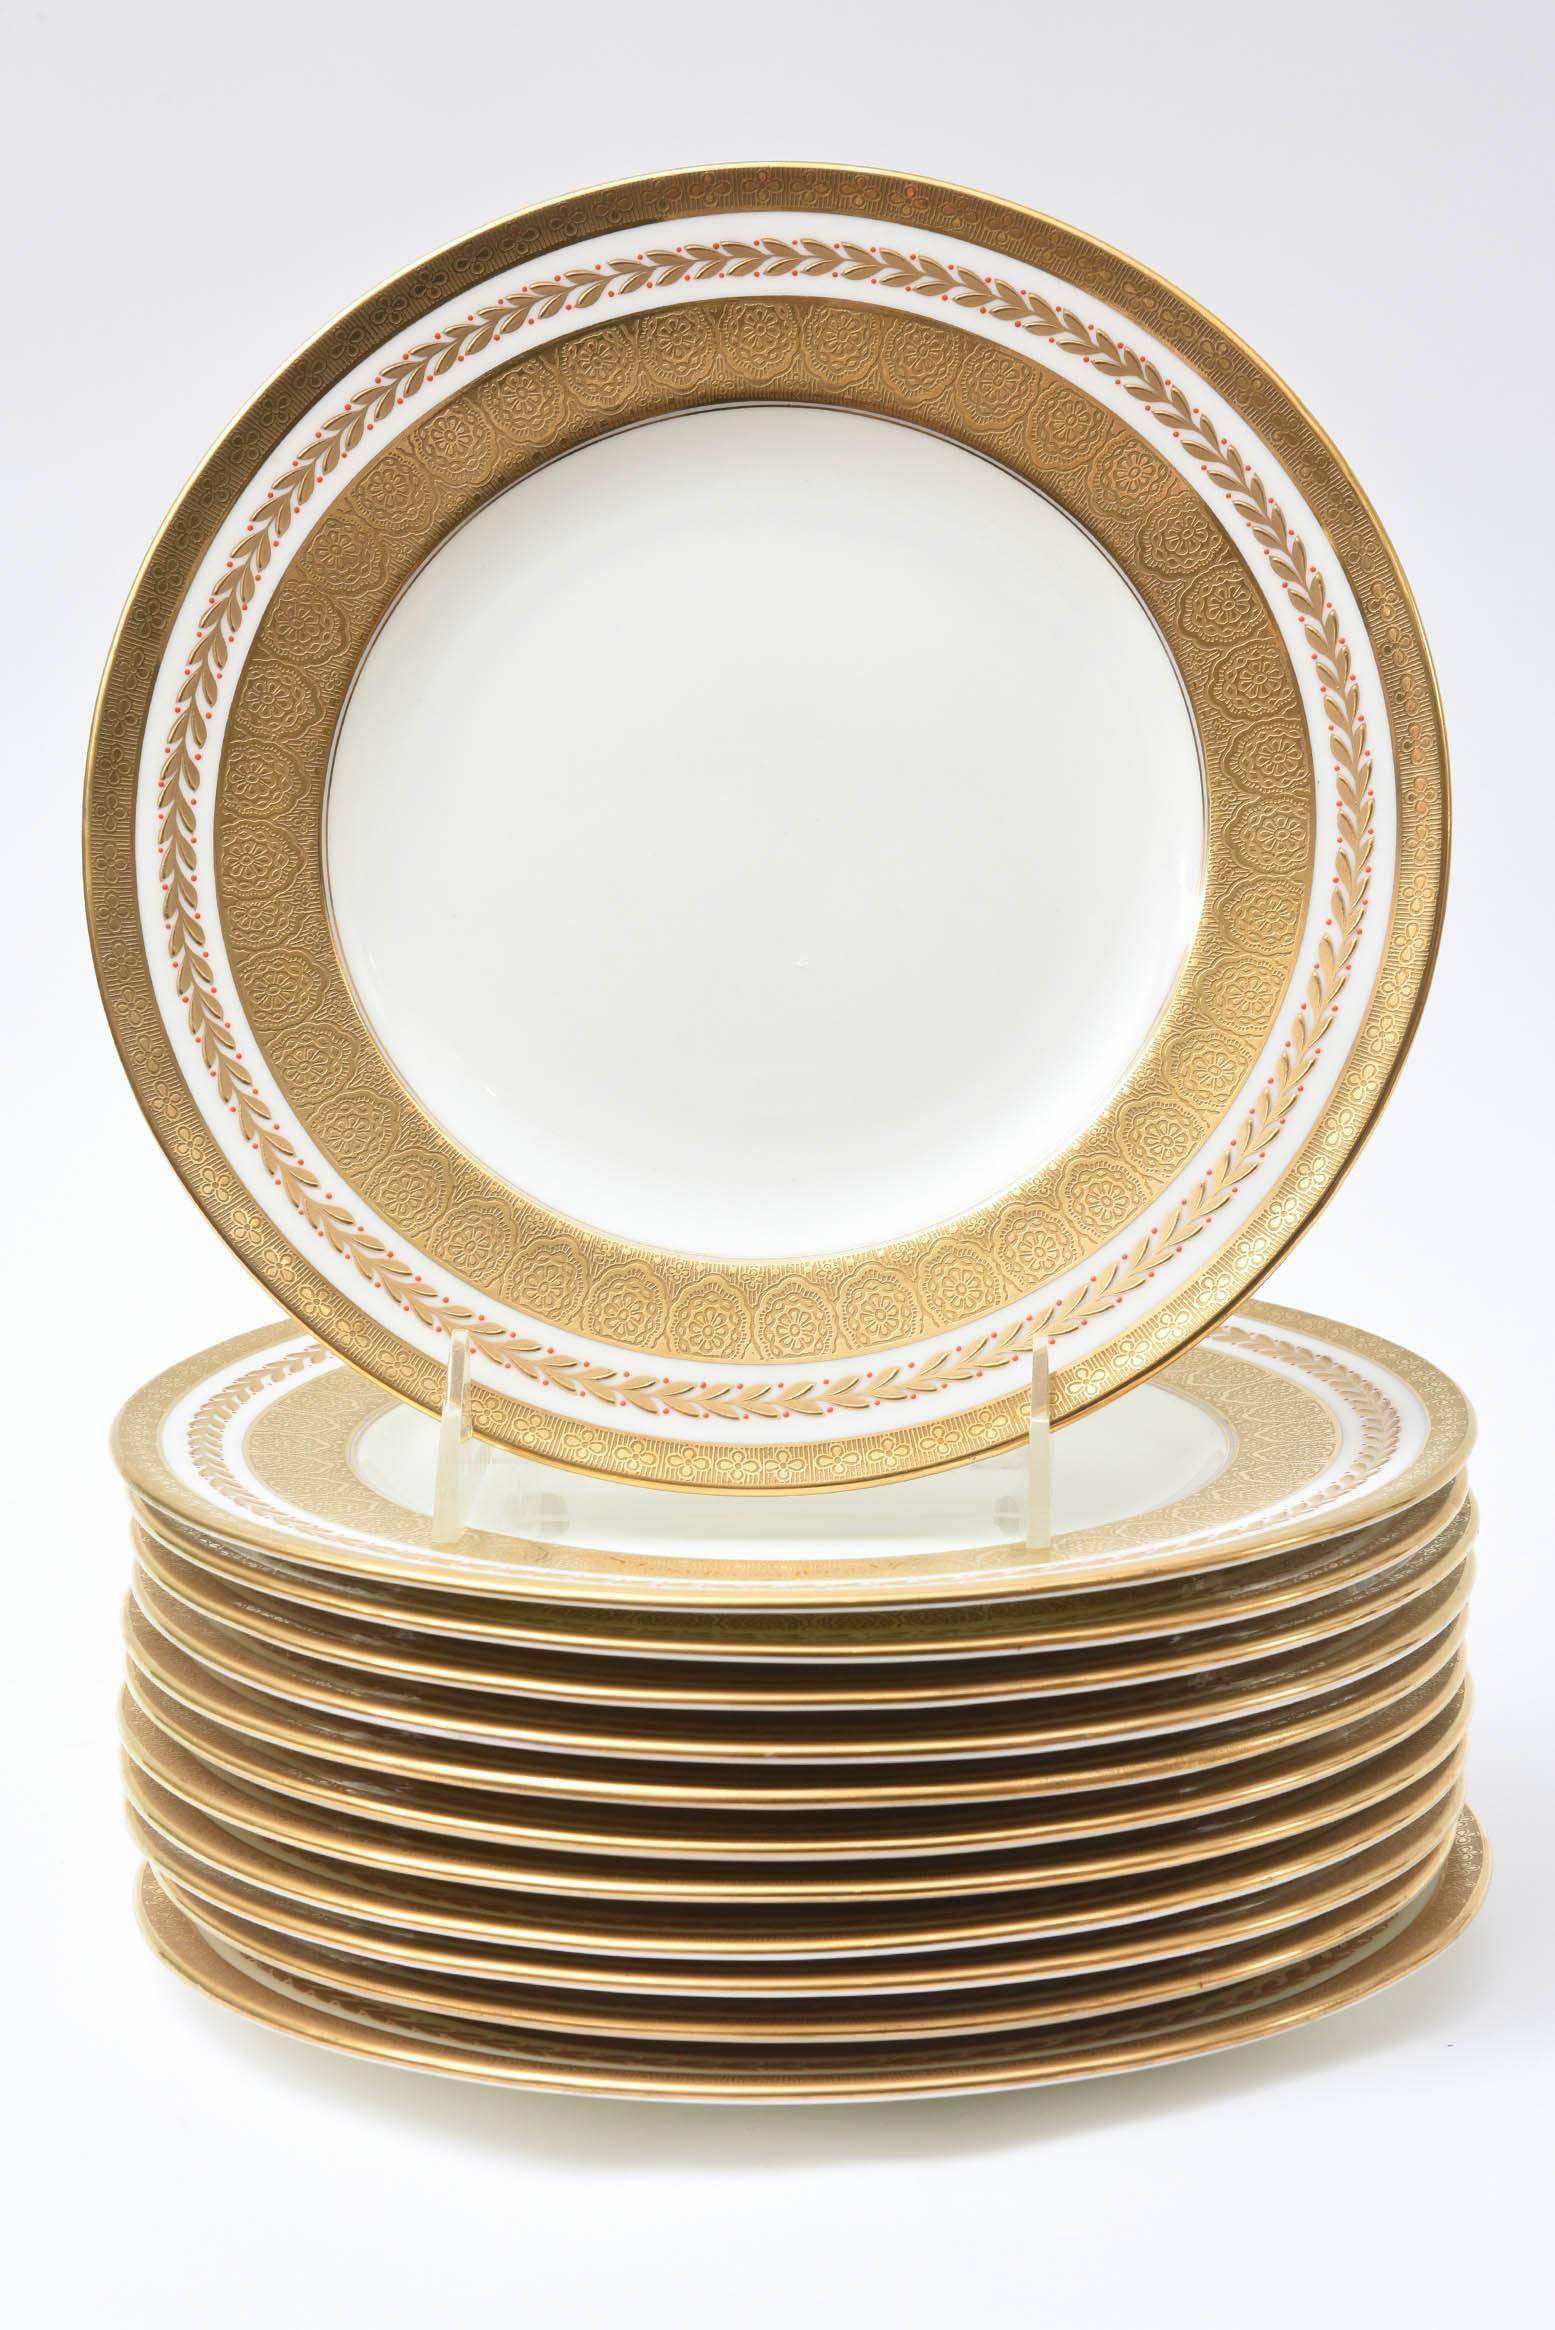 An elegant and tailored set of dinner plates by Cauldon, England custom ordered through the fine Gilded Age Retailer Tiffany & Co. Crisp white bone china and nice clear centres. This set came from the same estate as some of the other white and gold